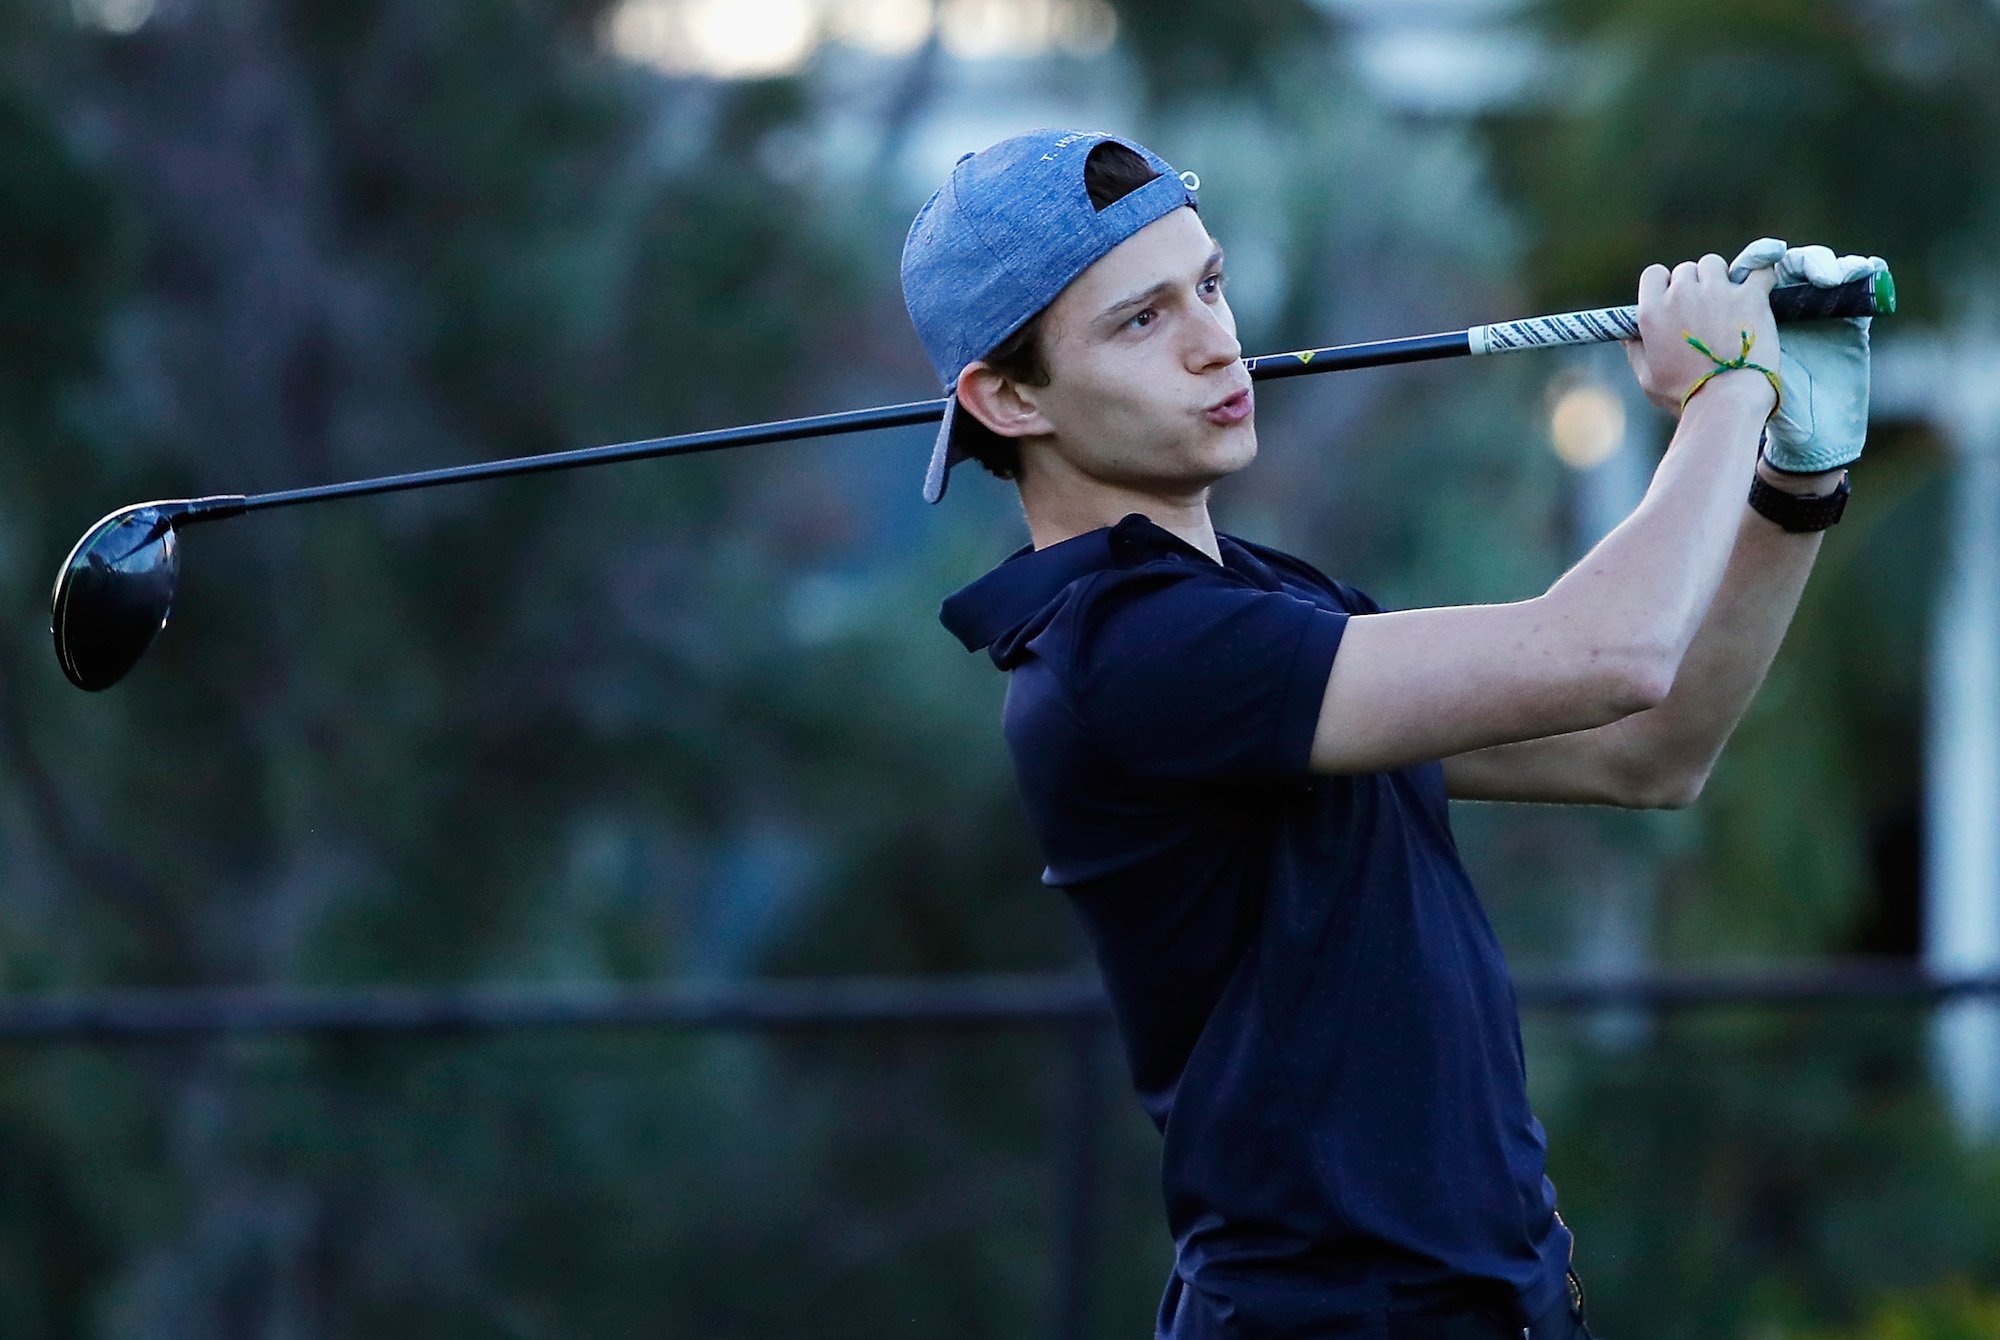 Tom Holland plays a shot during a practice round ahead of the Sony Open In Hawaii at Waialae Country Club on Jan. 9, 2019